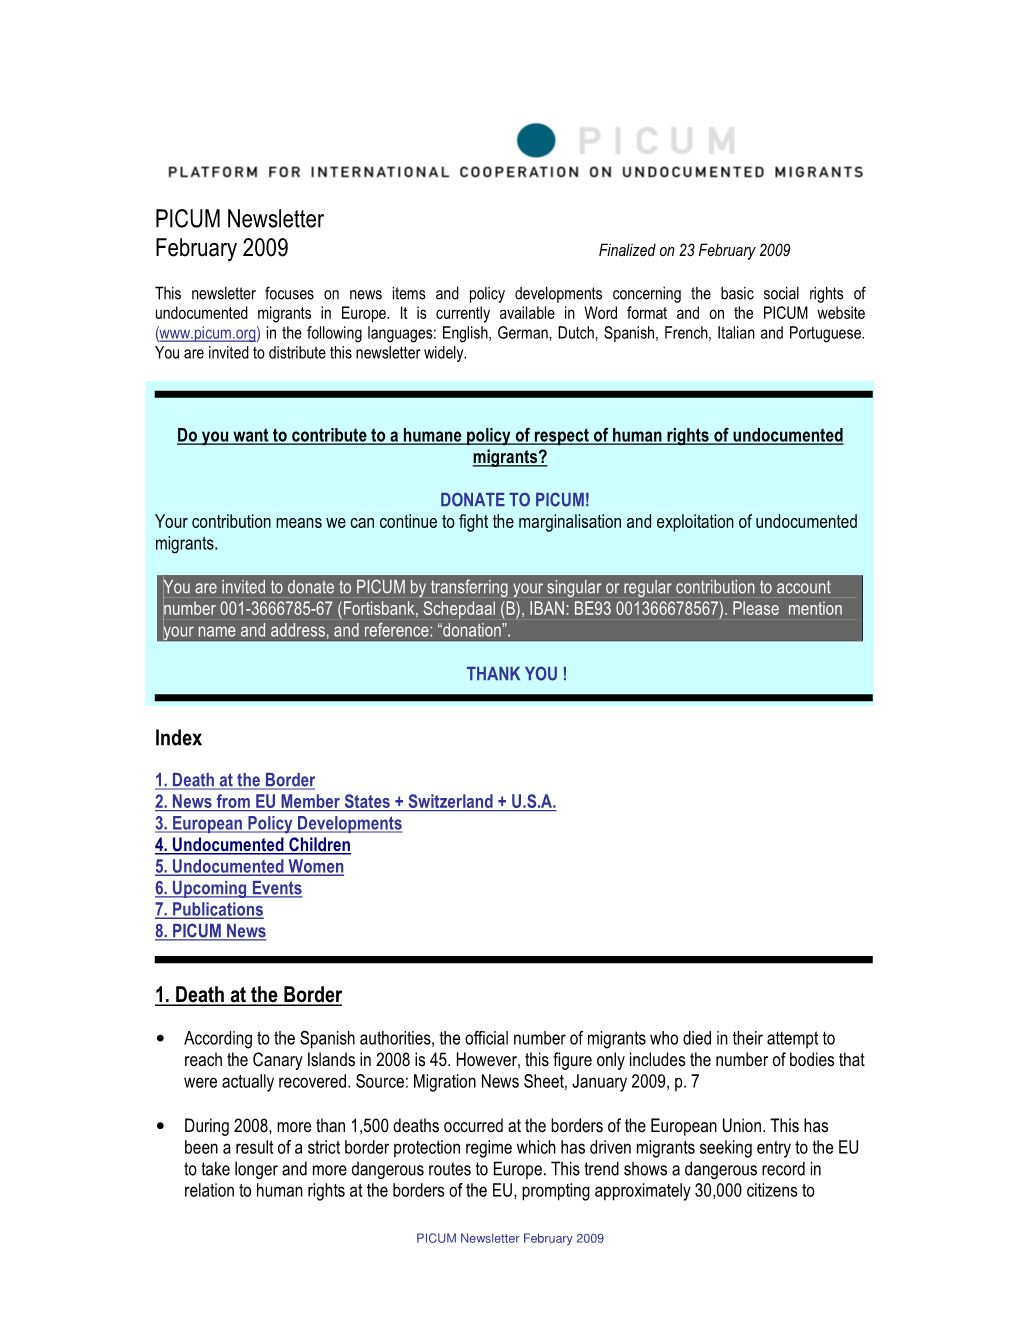 PICUM Newsletter February 2009 Finalized on 23 February 2009